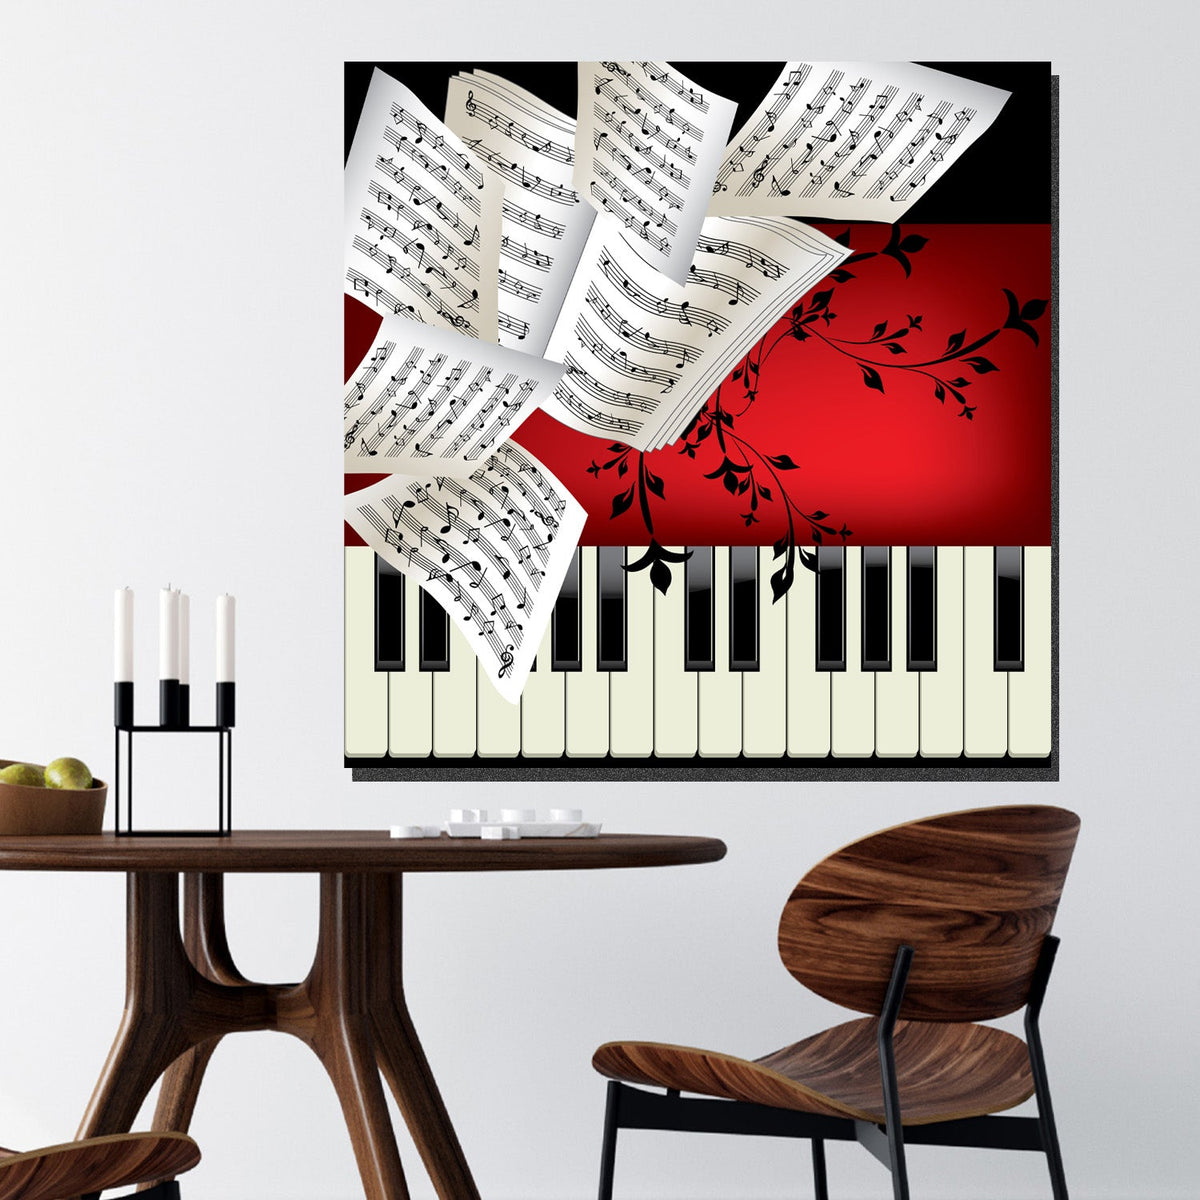 https://cdn.shopify.com/s/files/1/0387/9986/8044/products/MusicalNotesOnPianoCanvasArtprintStretched-2.jpg